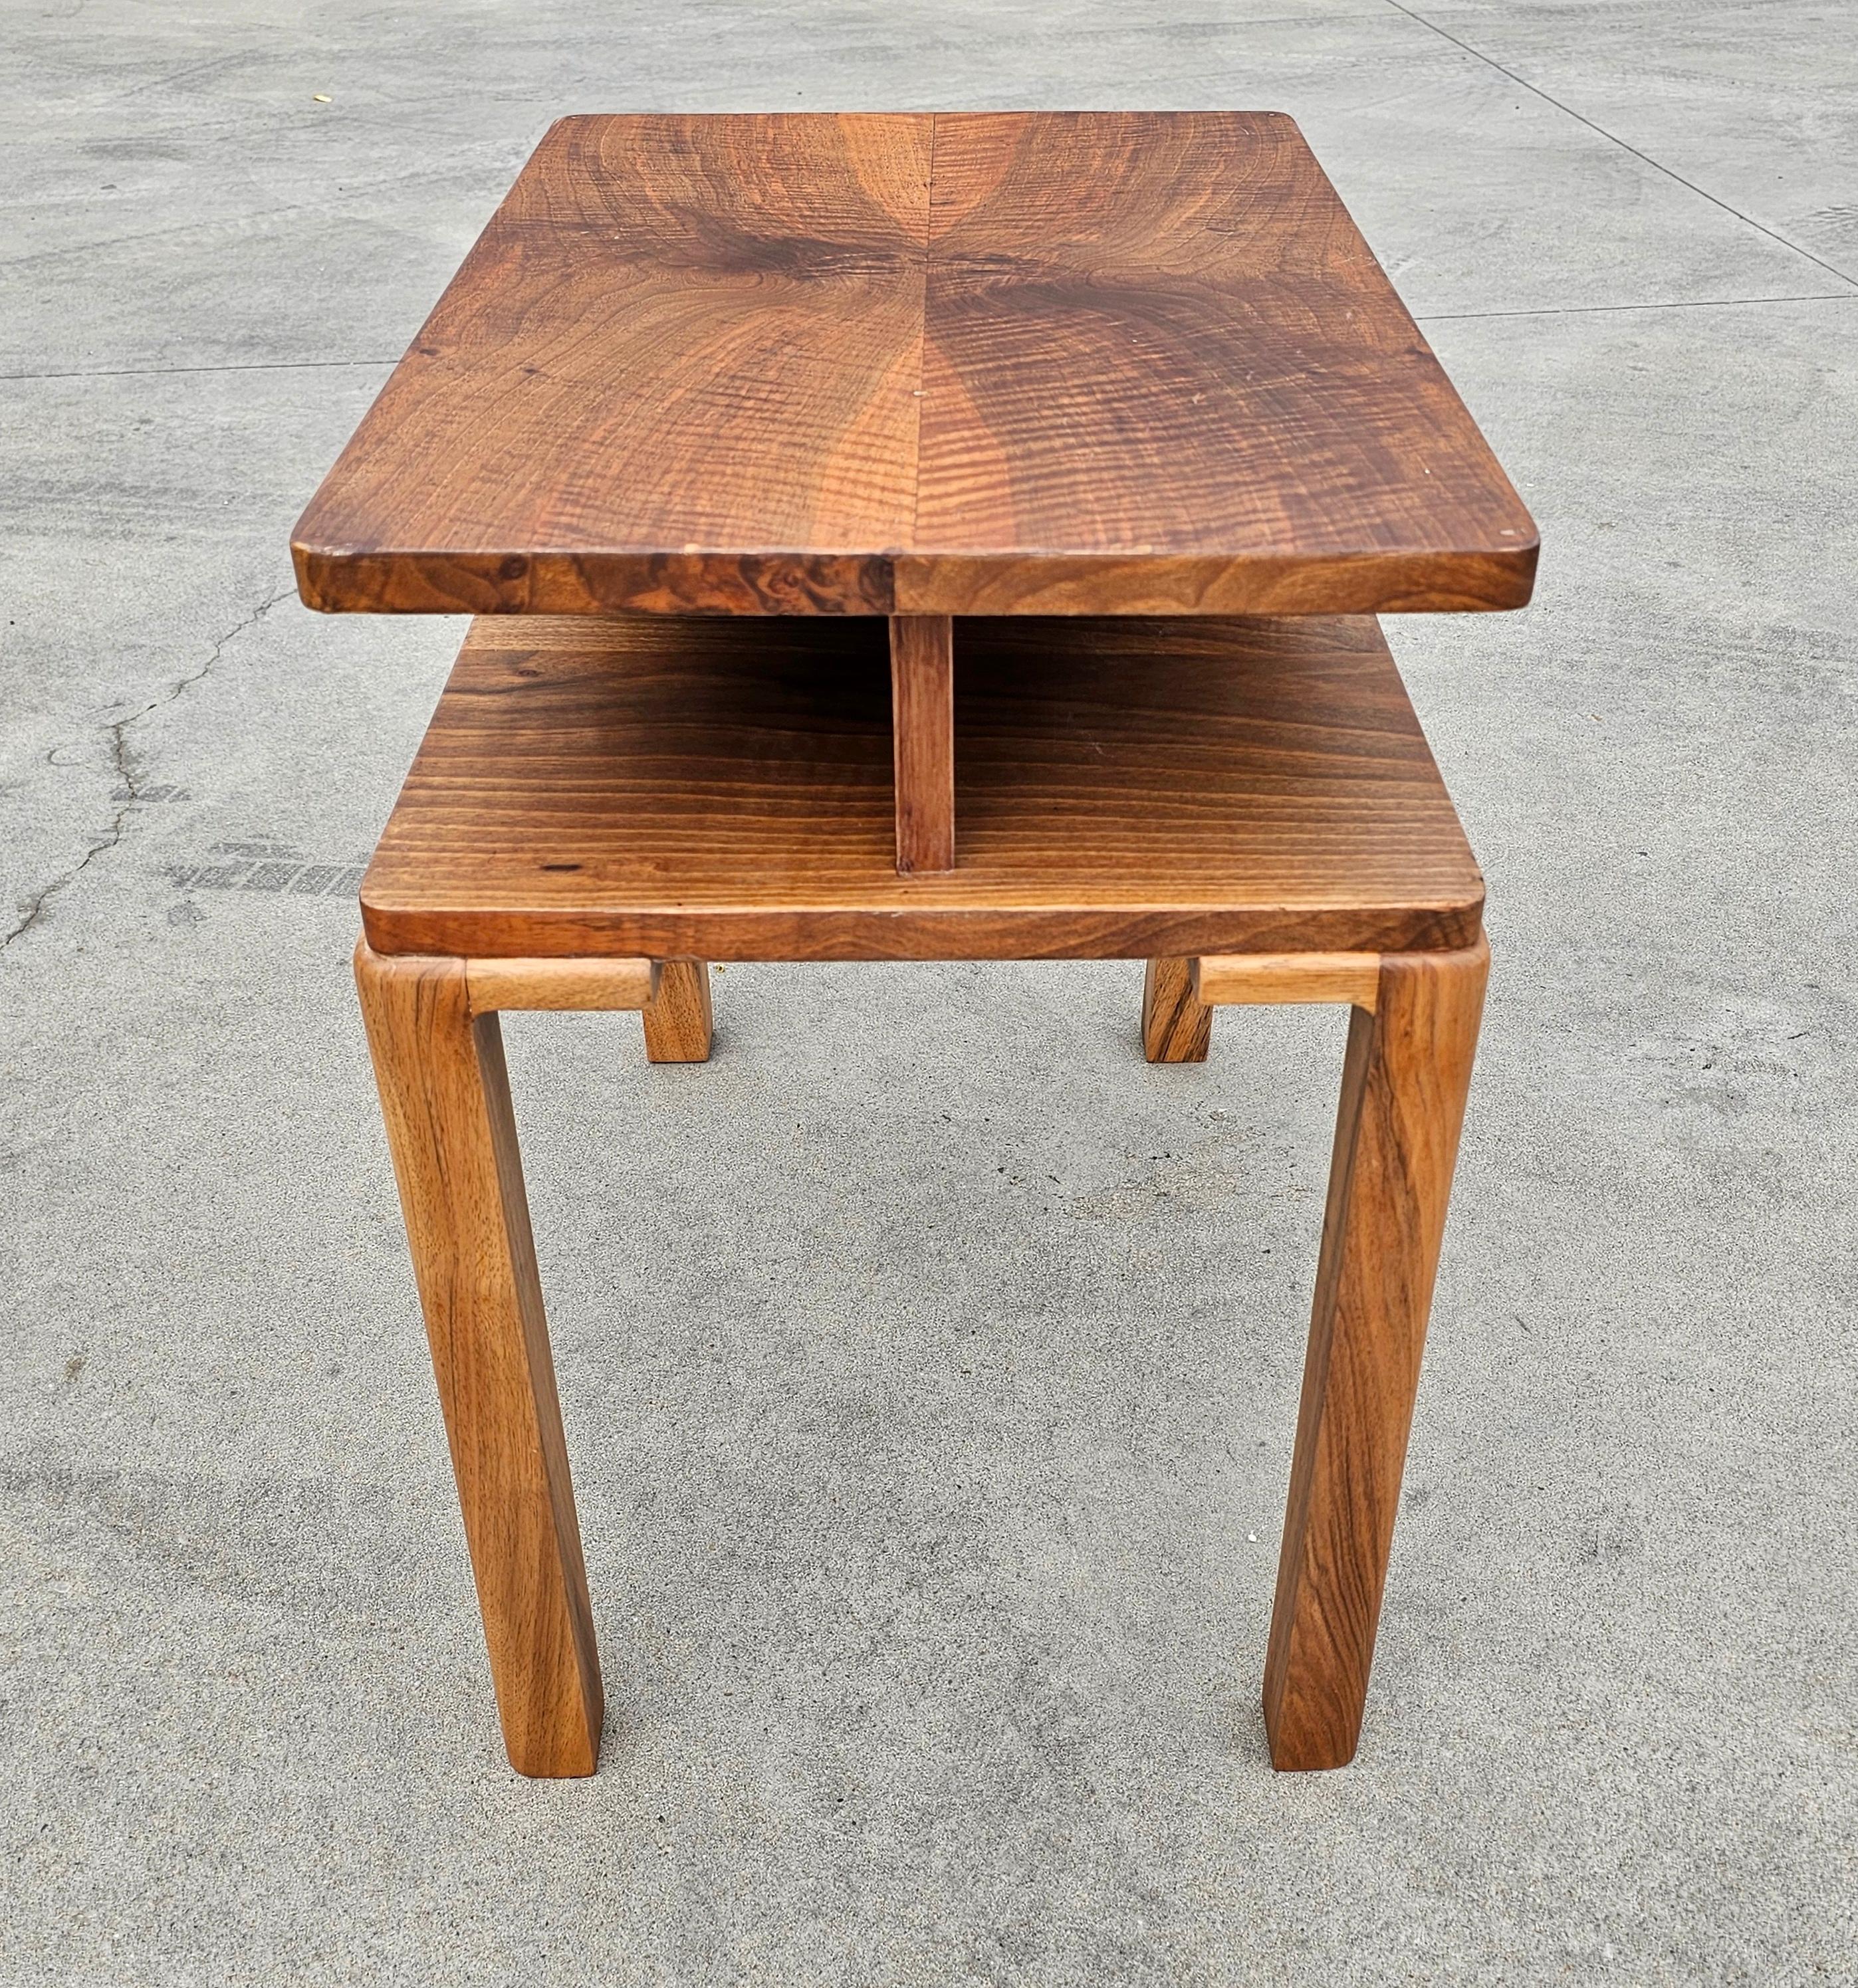 Rectangular Two Tiered Art Deco Walnut Side Table, Austria 1930s For Sale 7